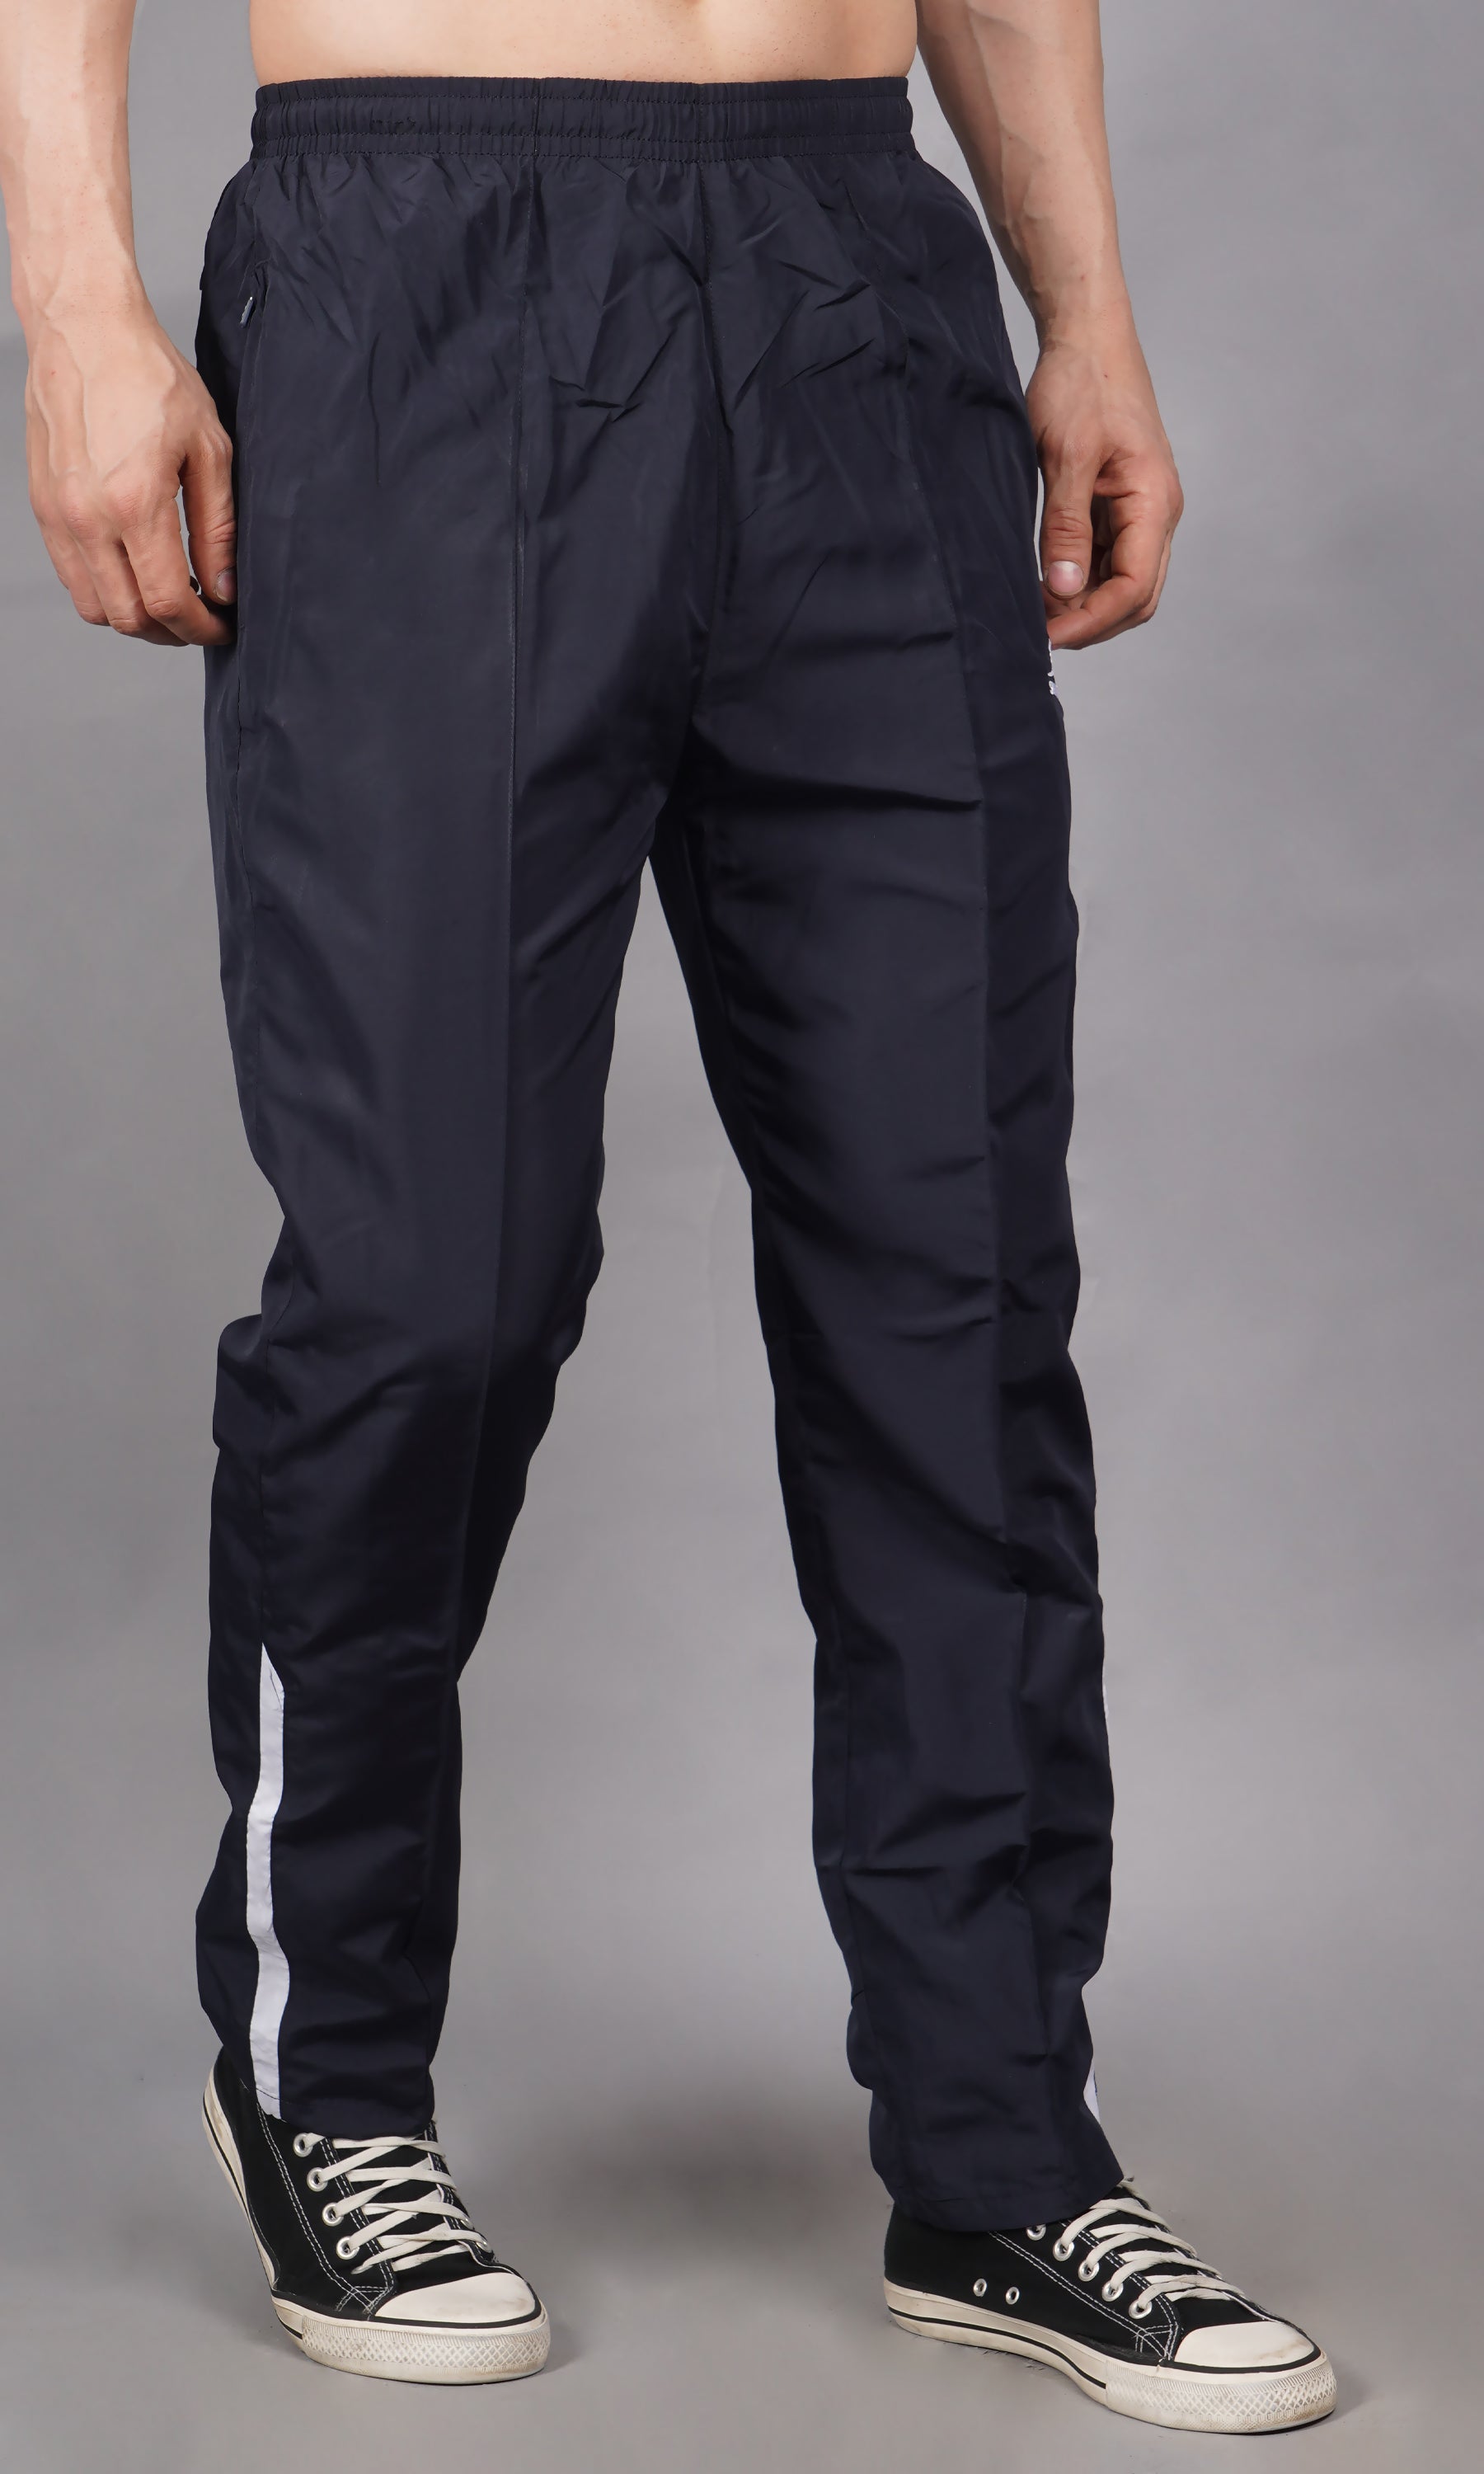 Sports Wear Latest Track Pants Lower for Men under 500 Pack of 2